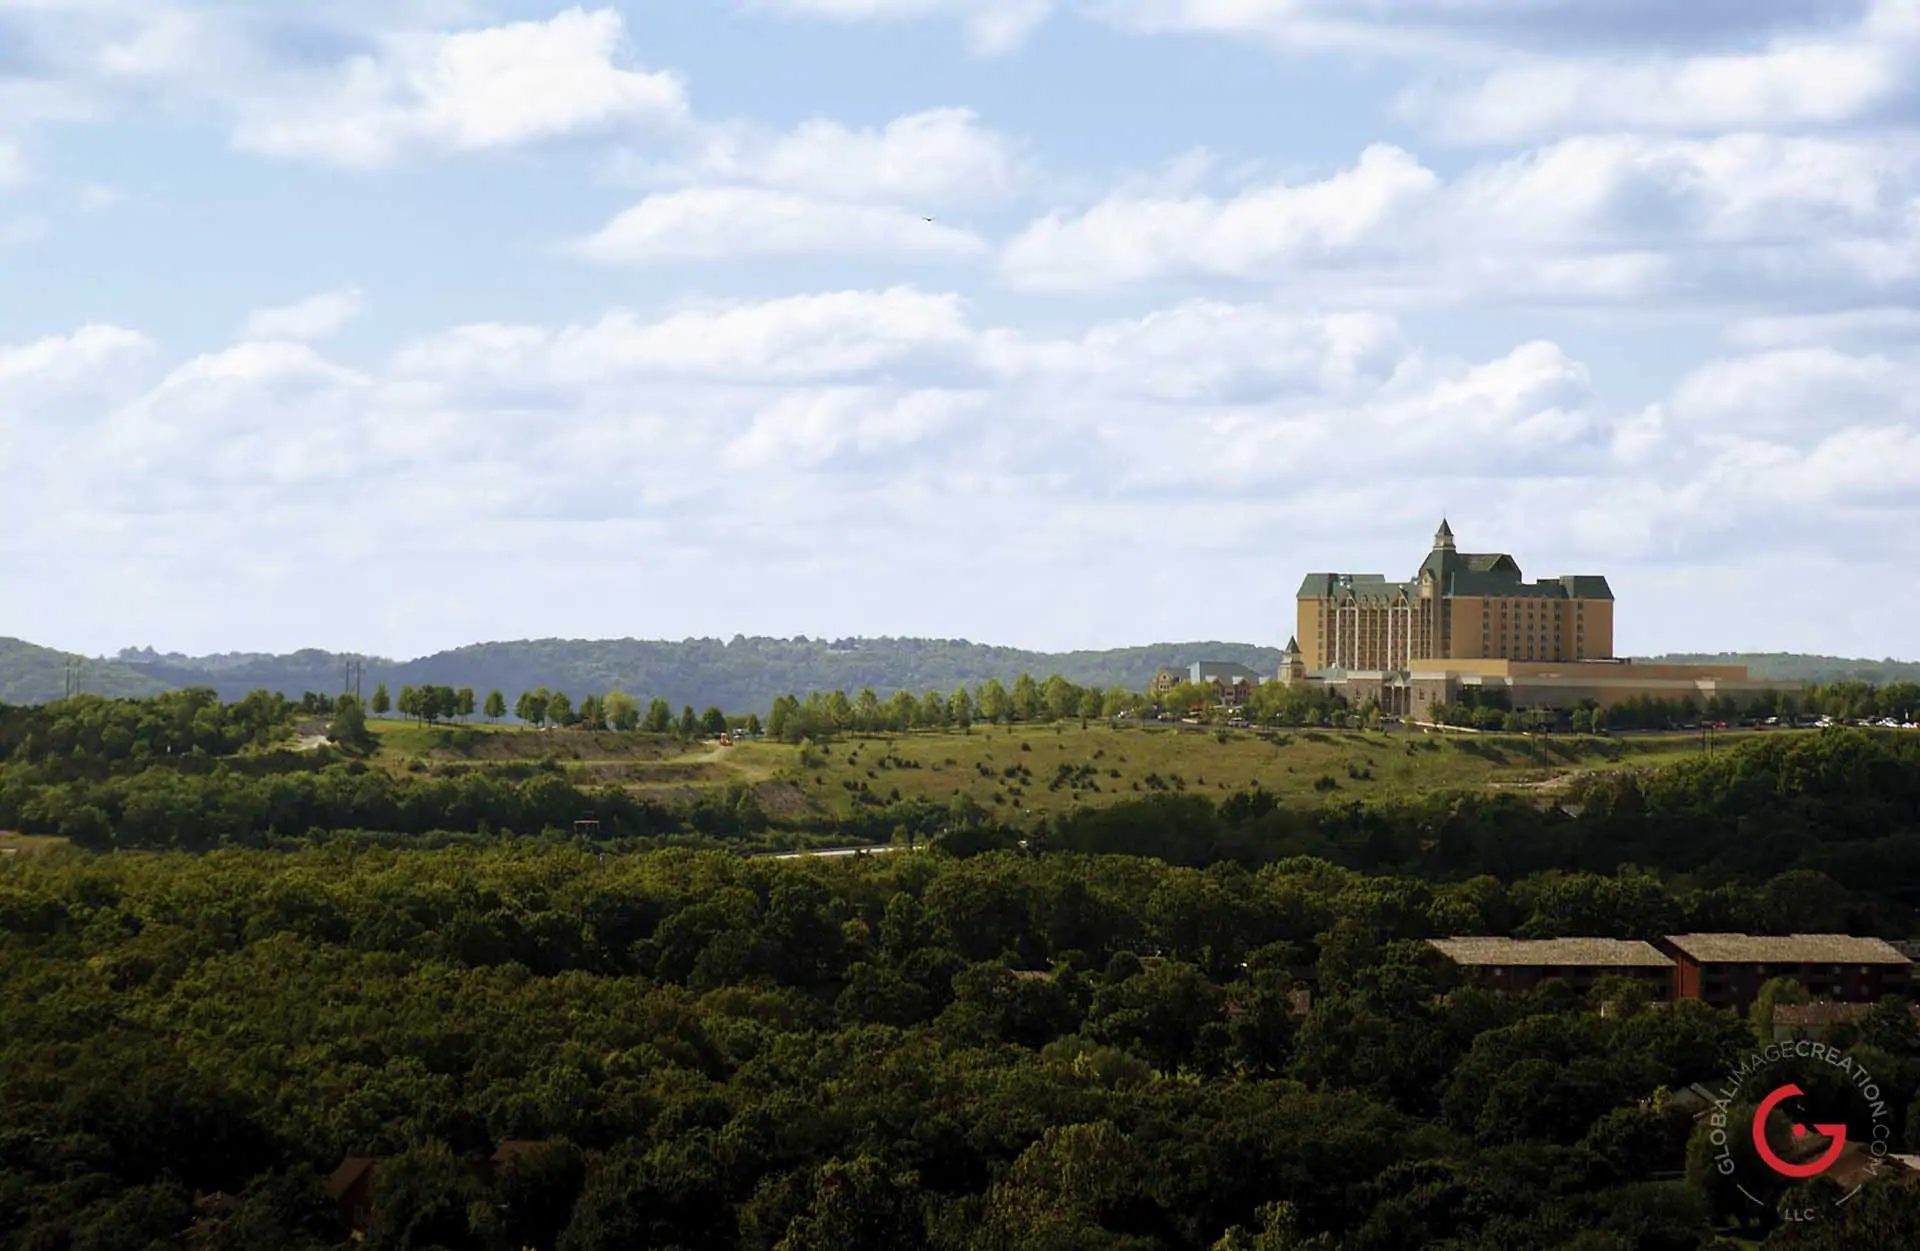 The Chateau on the lake hotel hovers on the horizon under light blue skies with puffy white clouds. - Advertising photographers in Branson Missouri, Branson Missouri photography